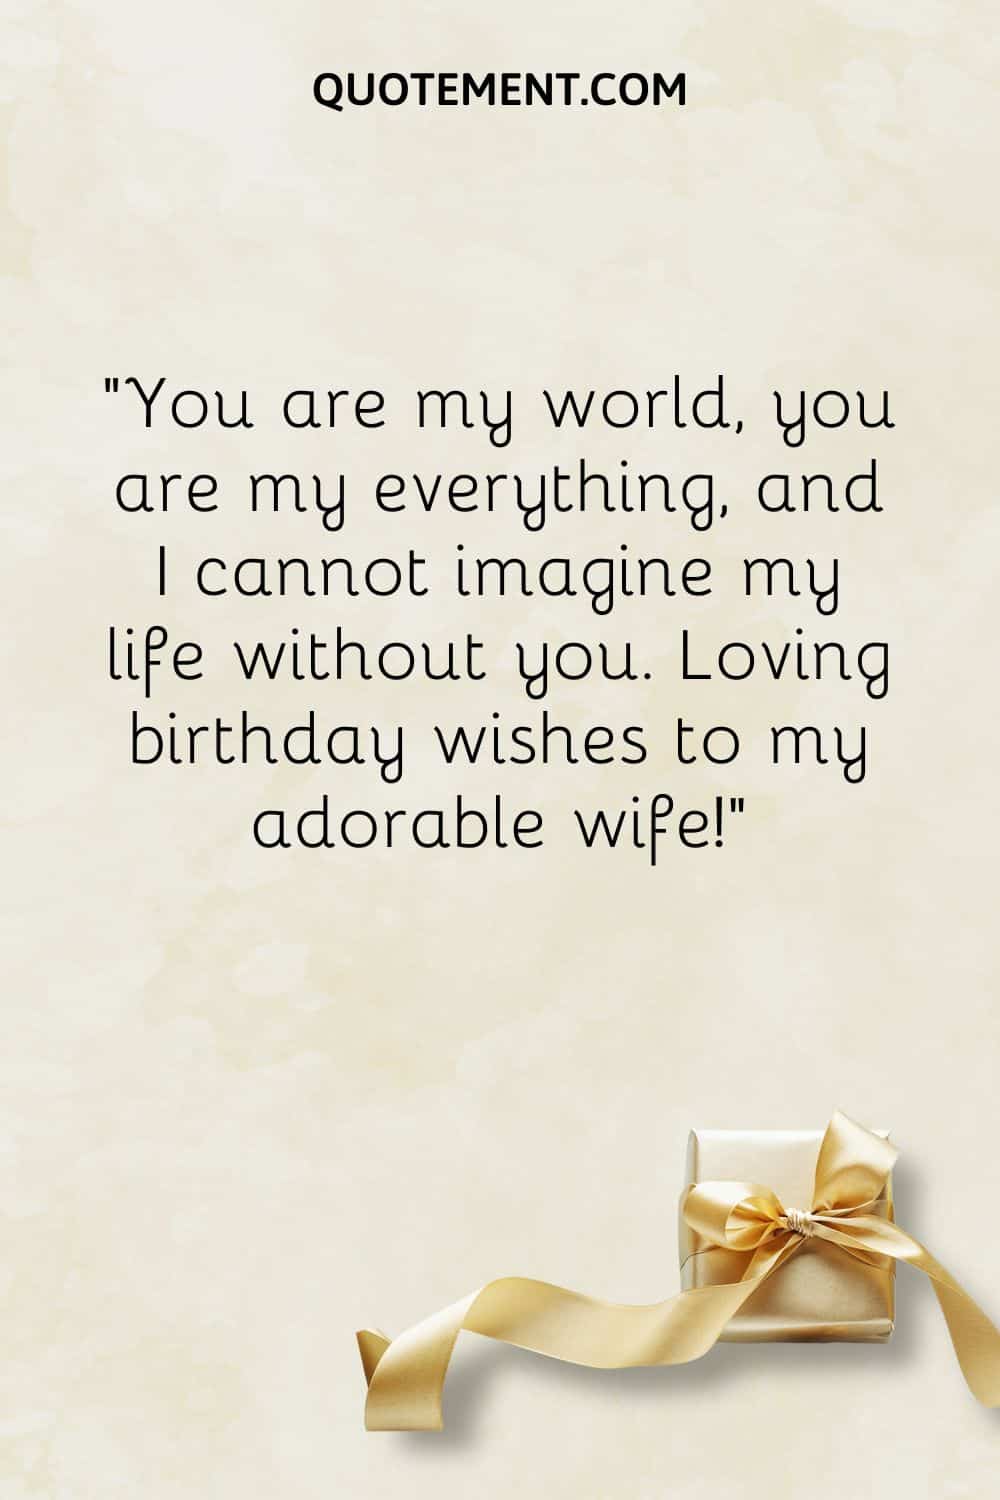 “You are my world, you are my everything, and I cannot imagine my life without you. Loving birthday wishes to my adorable wife!”